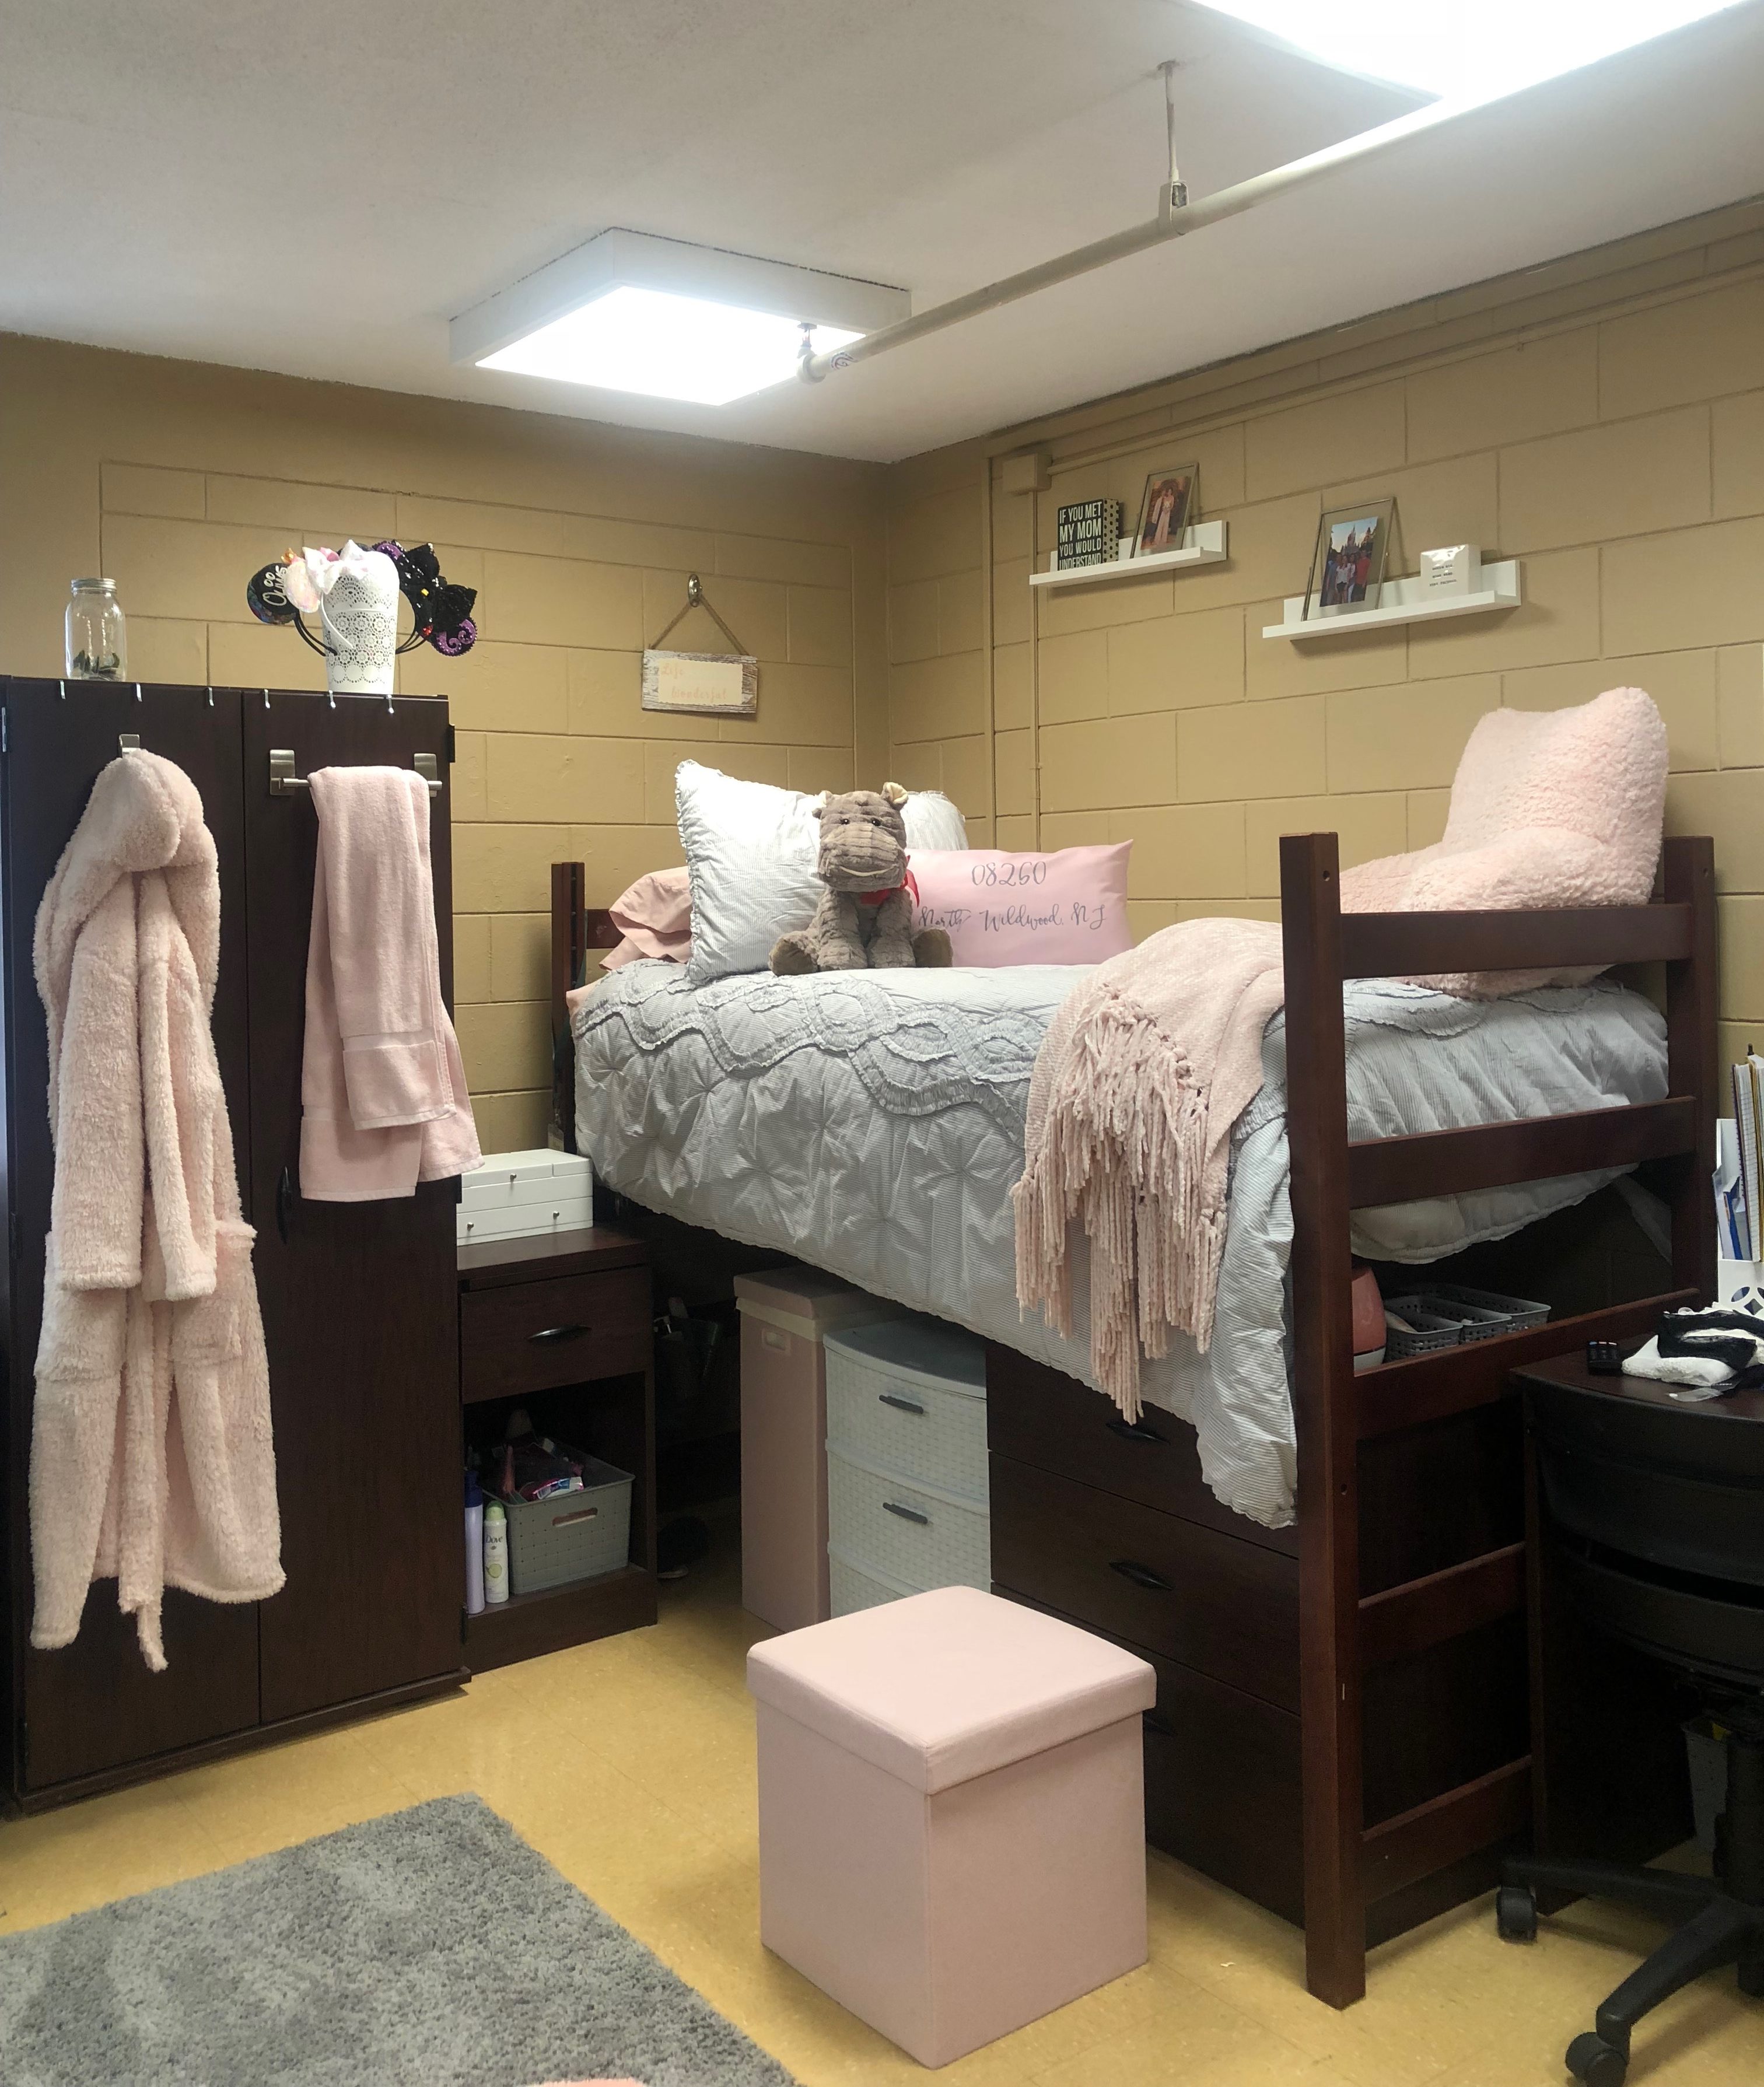 Tips for Decorating and Making Your Dorm YOU